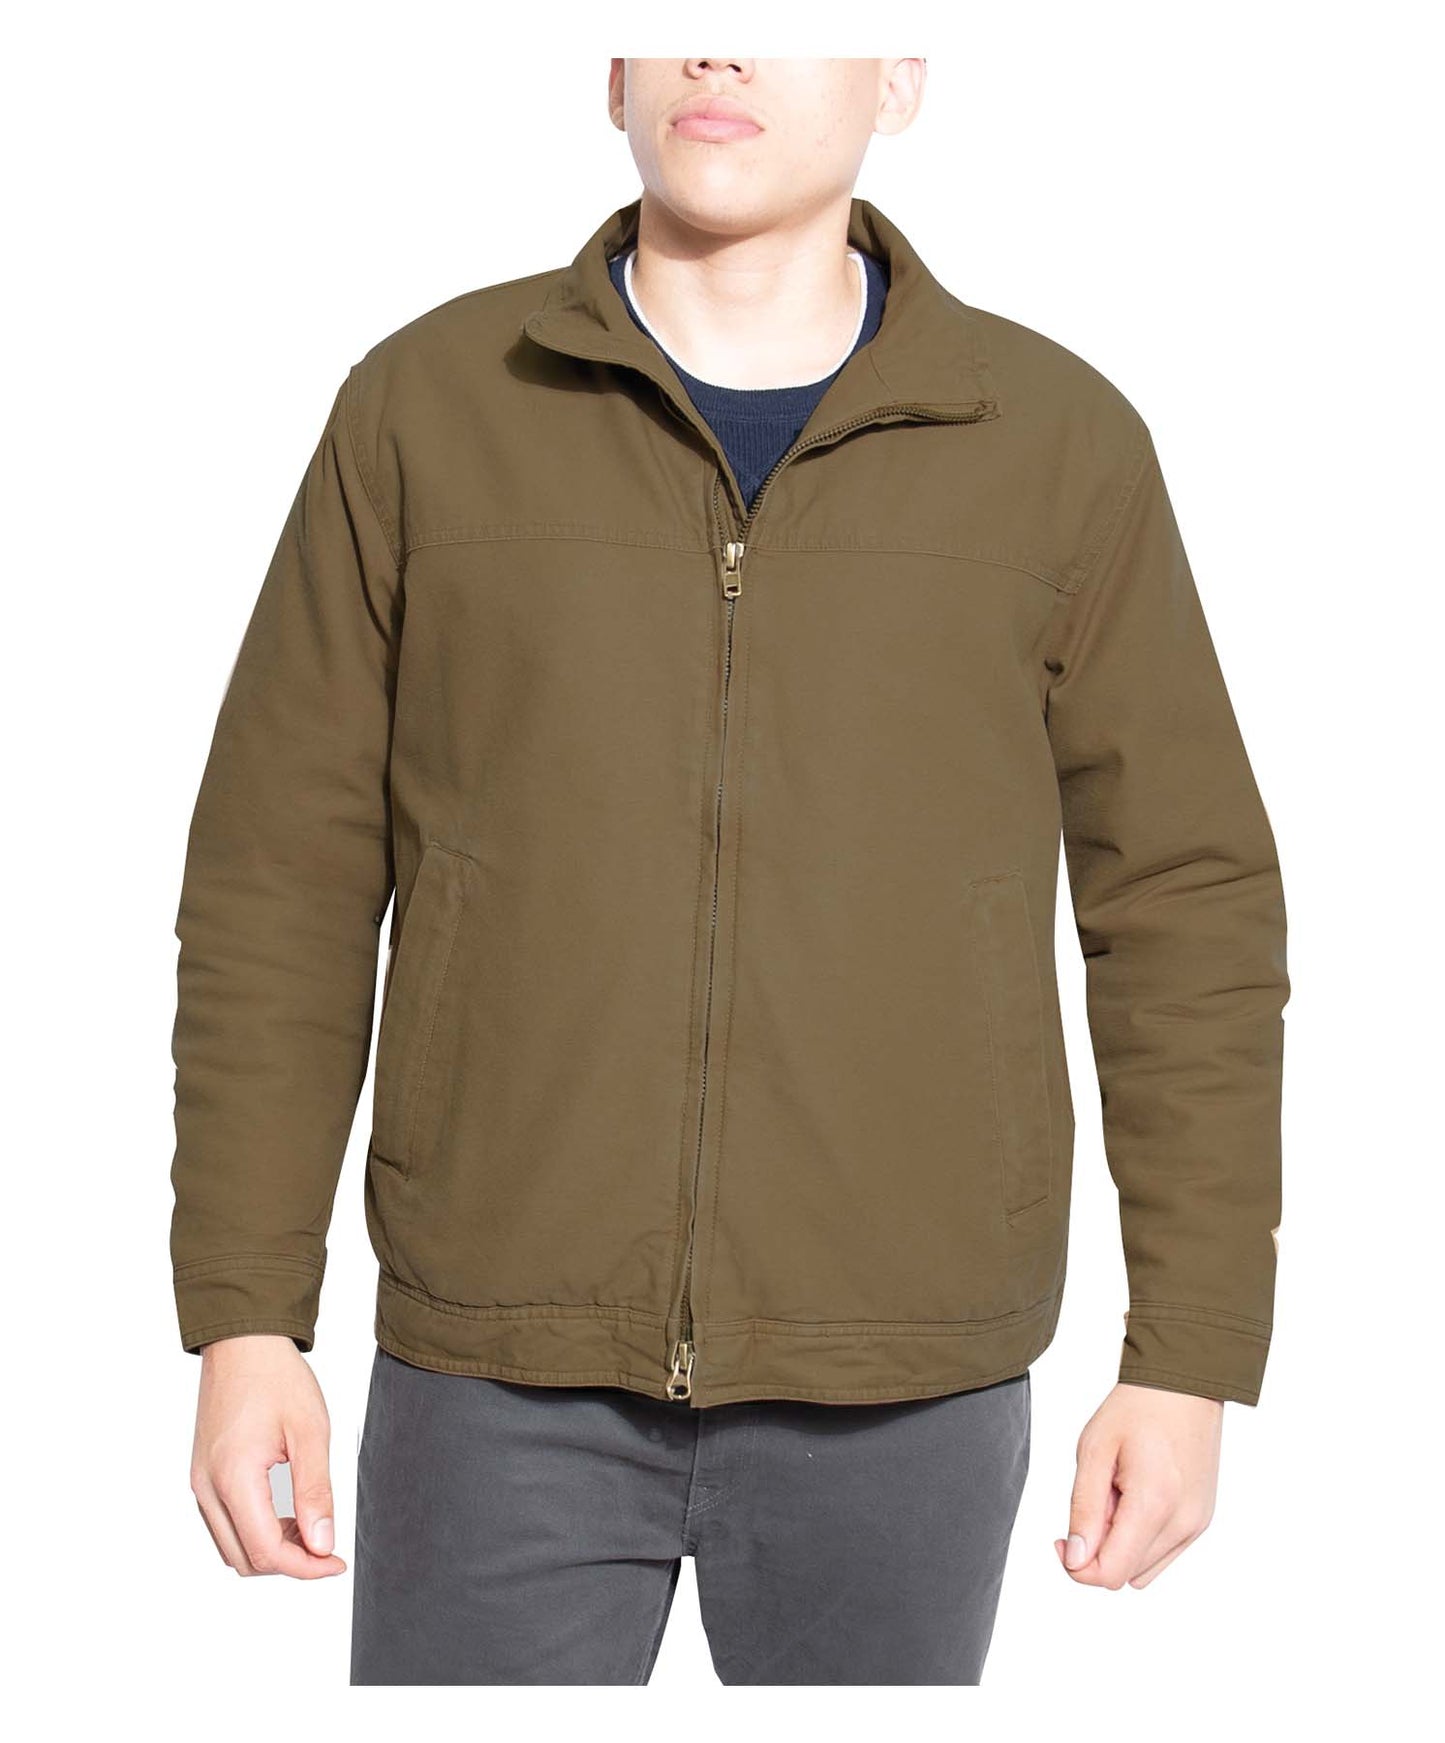 Men's Coyote Brown Concealed Carry 3 Season Jacket by Rothco